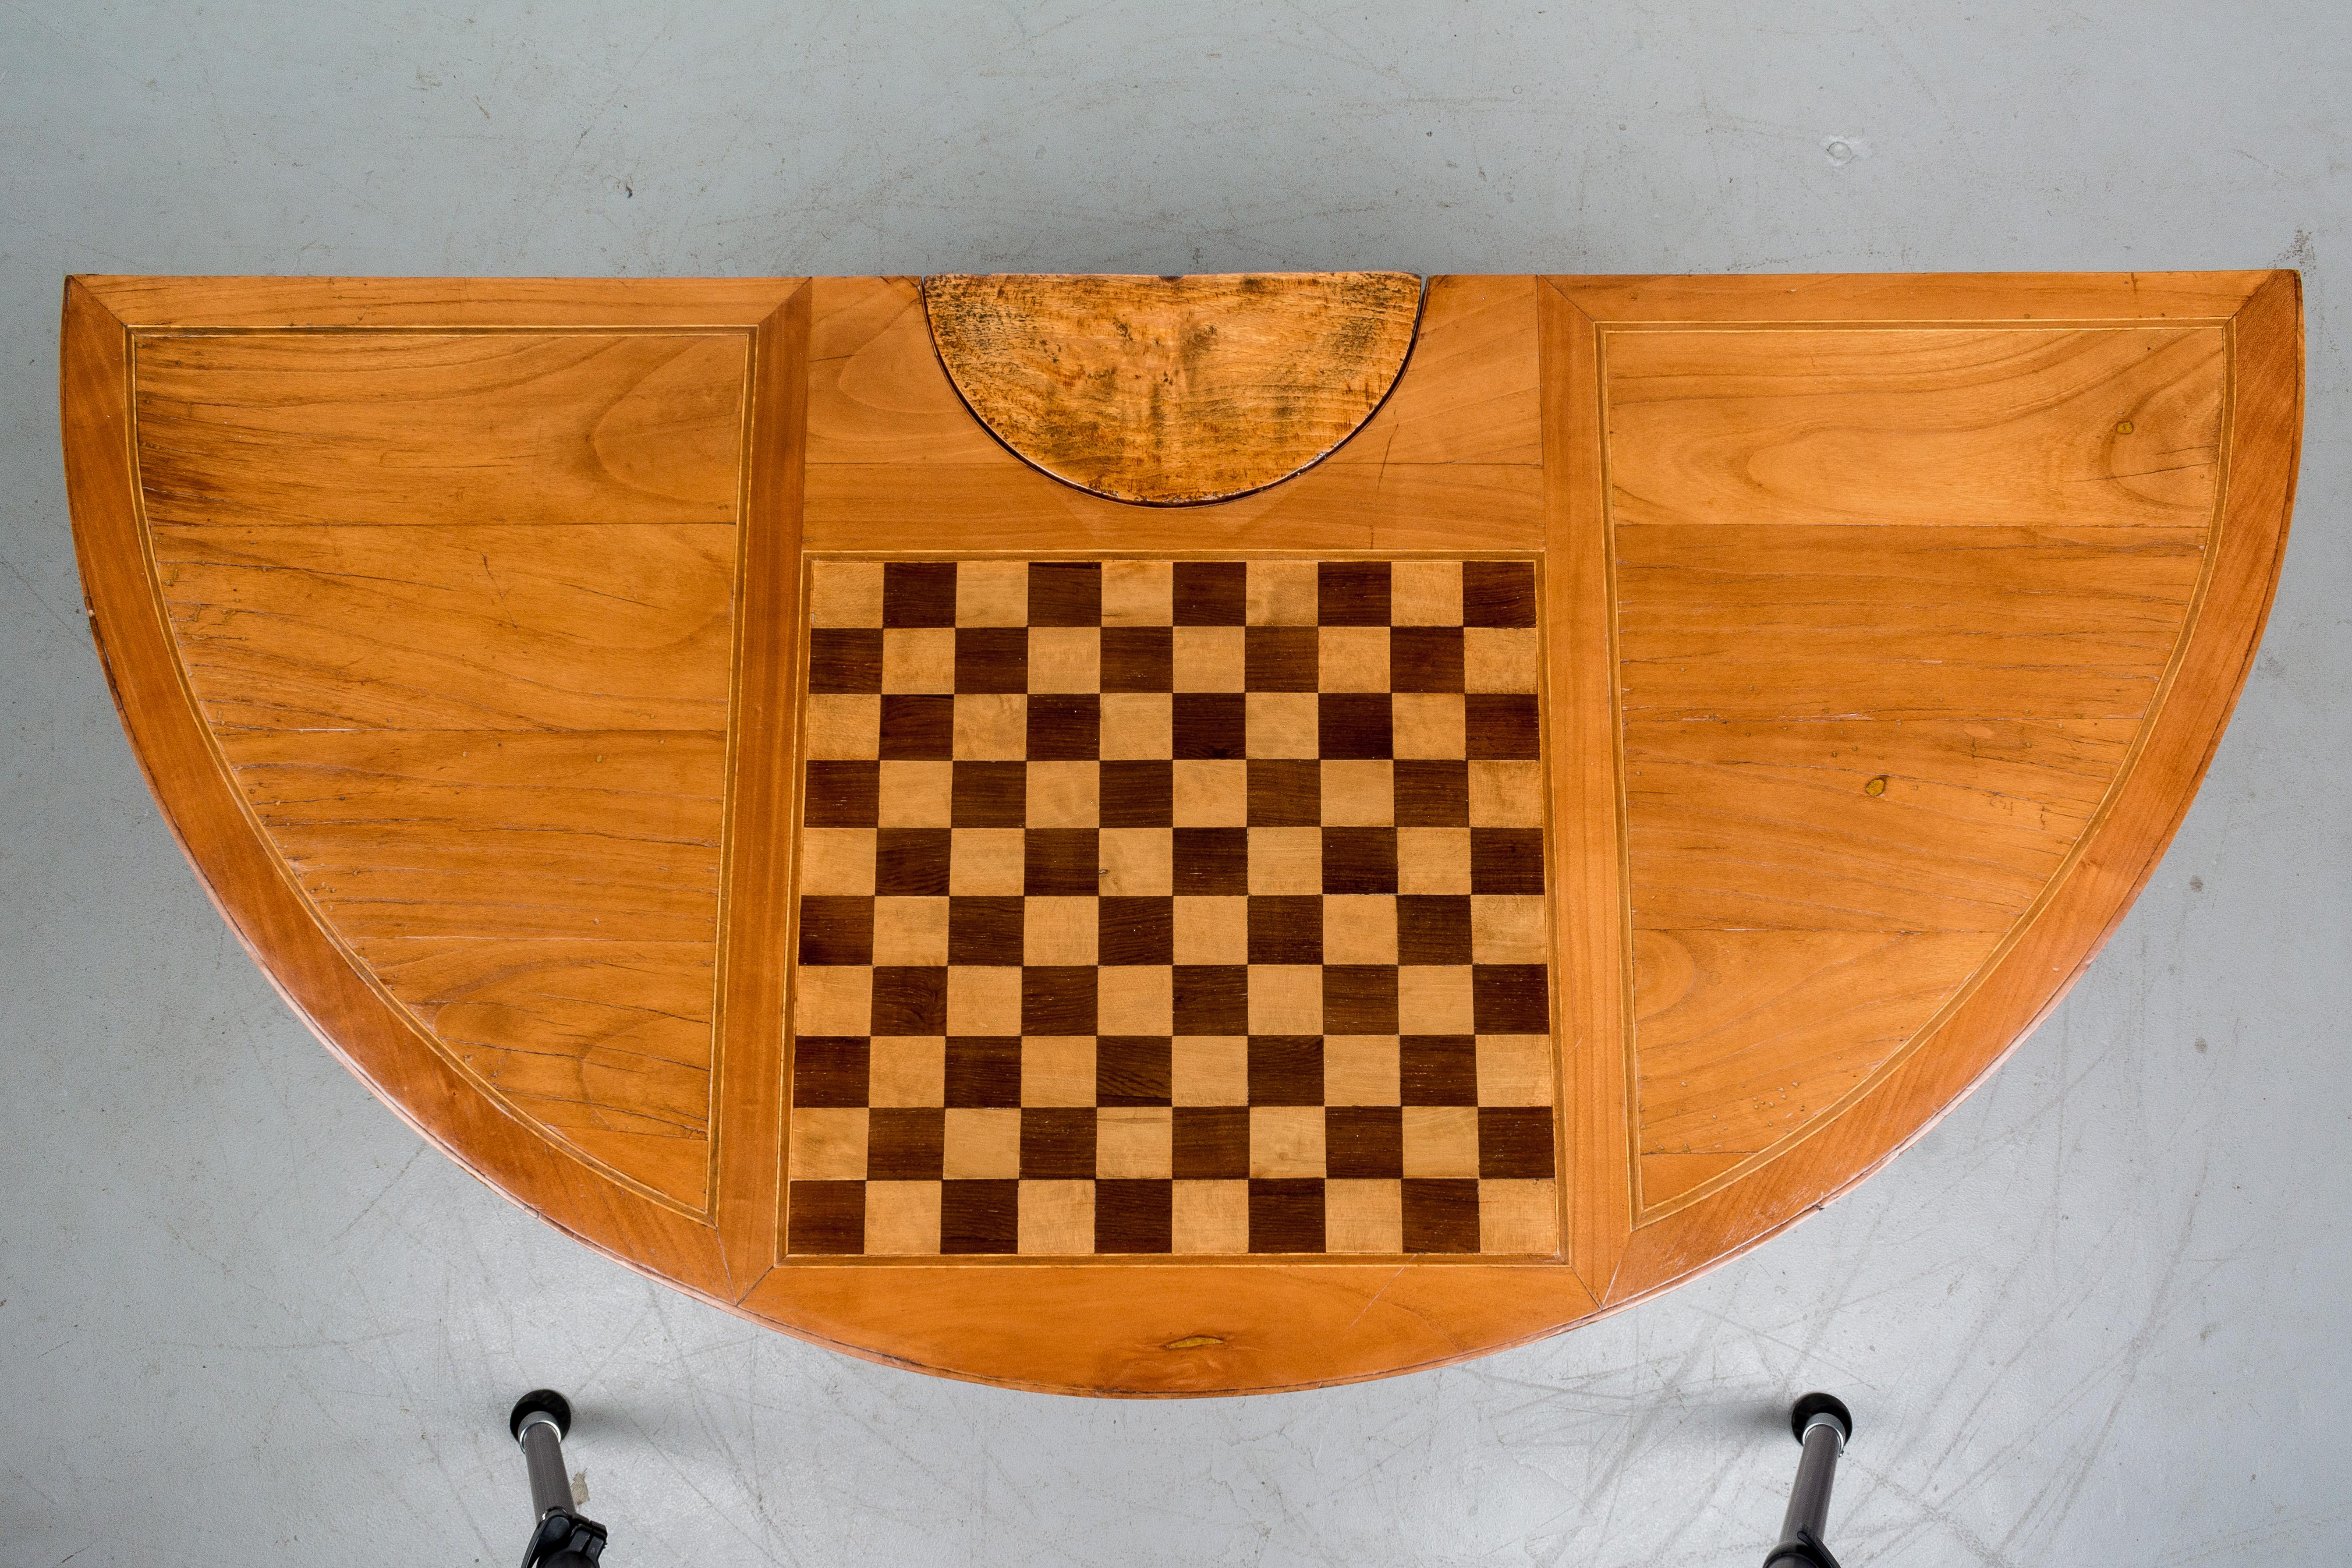 A 19th century French Louis XV style demilune flip top console game table made of solid cherry with a checkerboard made of inlaid veneer of cherry. The center leg pulls out to support the top and to reveal a drawer for storing playing pieces. The